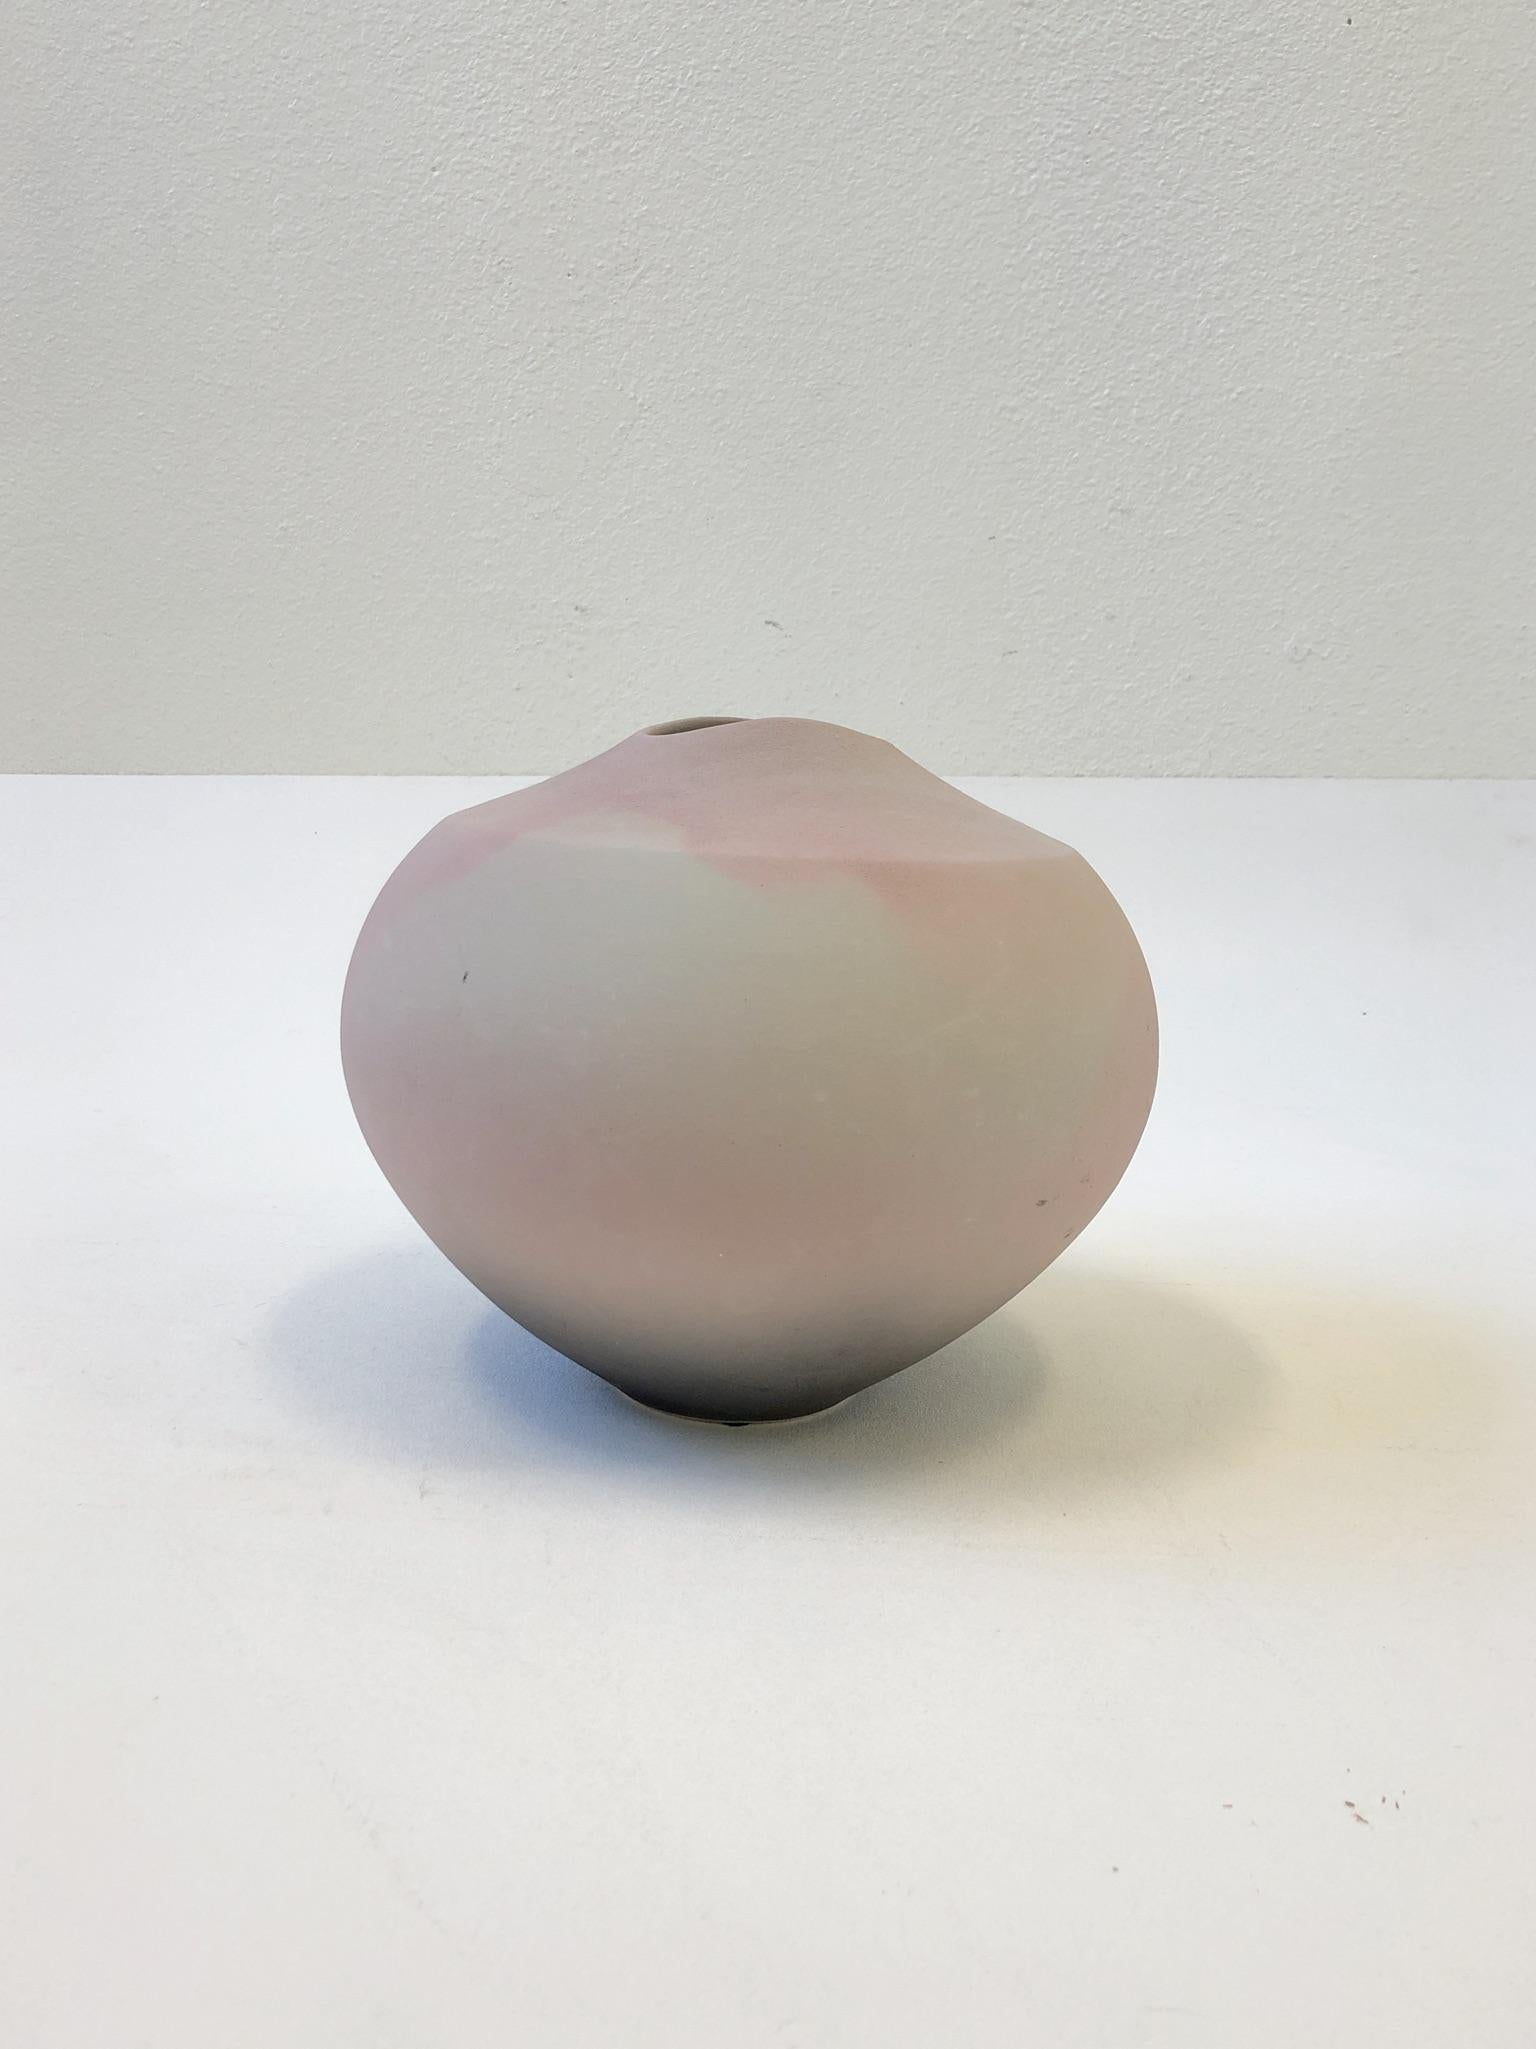 A beautiful studio Raku Ovoid pink ceramic vase design in the 1980s by Garry Ubben for Steve Chase. The vase is signed Ubben and retains the Steve Chase label.
Dimension: 11” diameter, 8.75” high.